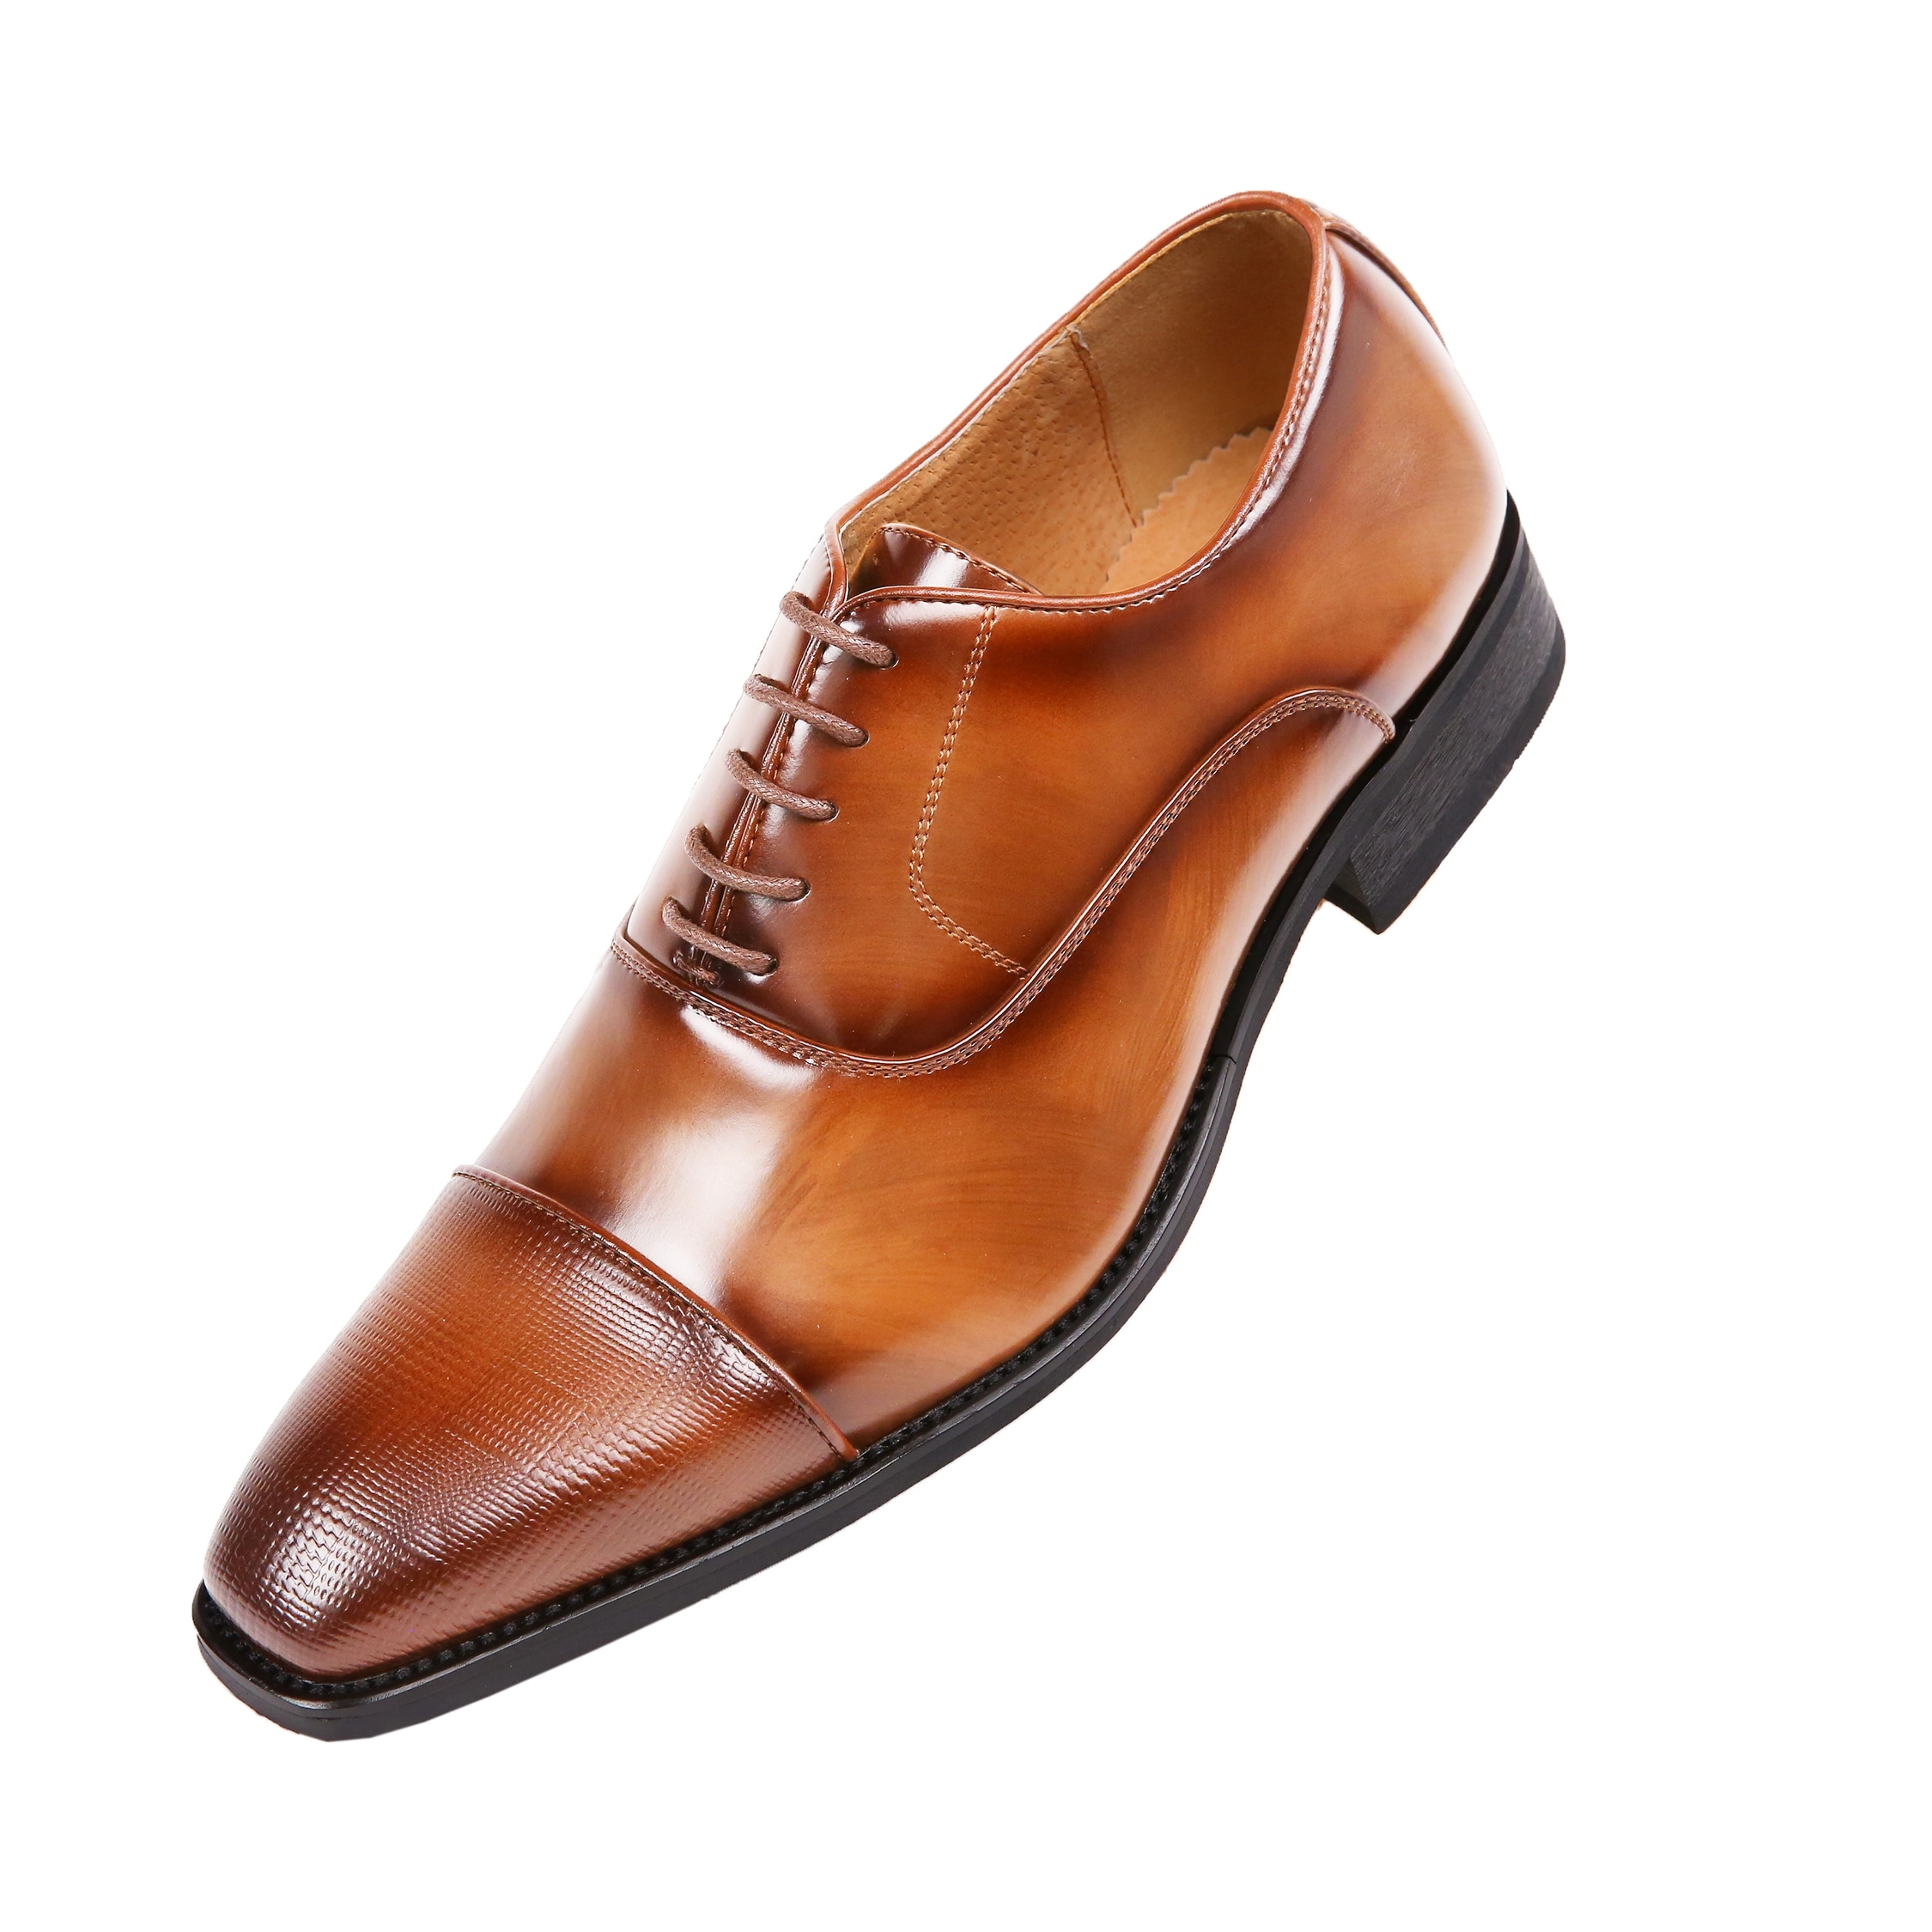 Smooth Cap Toe Oxford Dress Shoes 